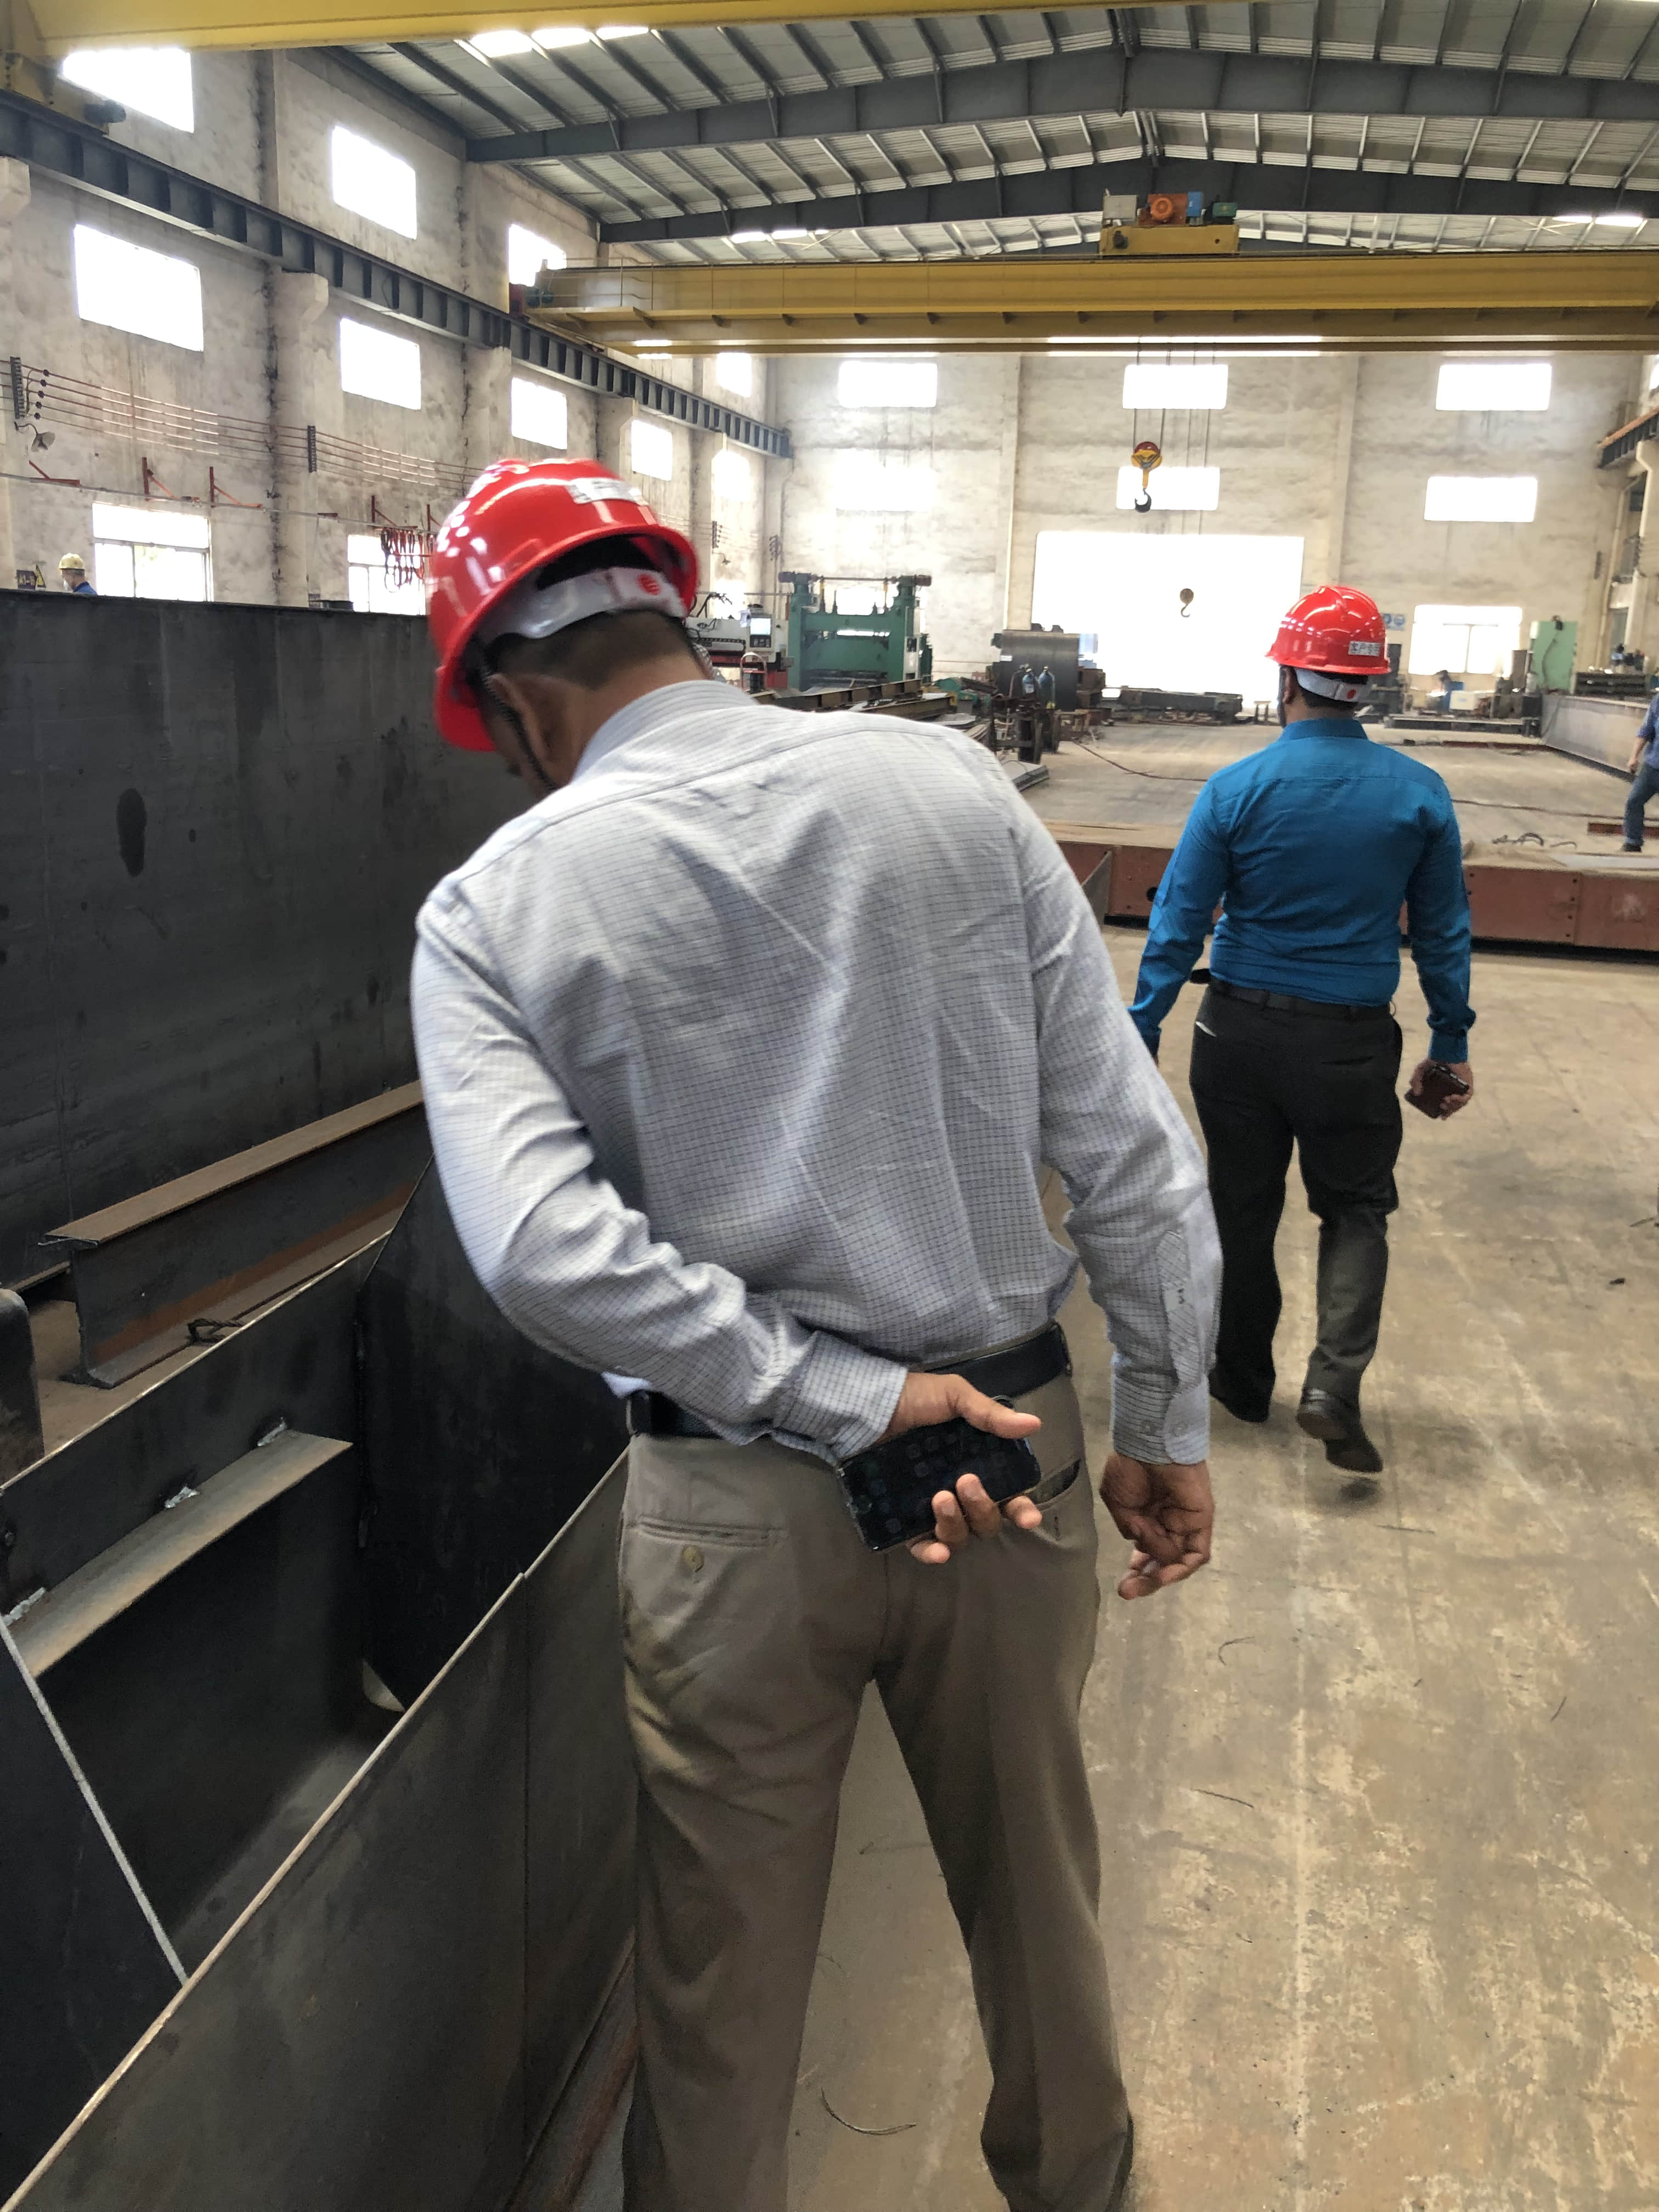 In 2019, "One Belt And One Road" - Sri Lankan customers came to the company to inspect the goods